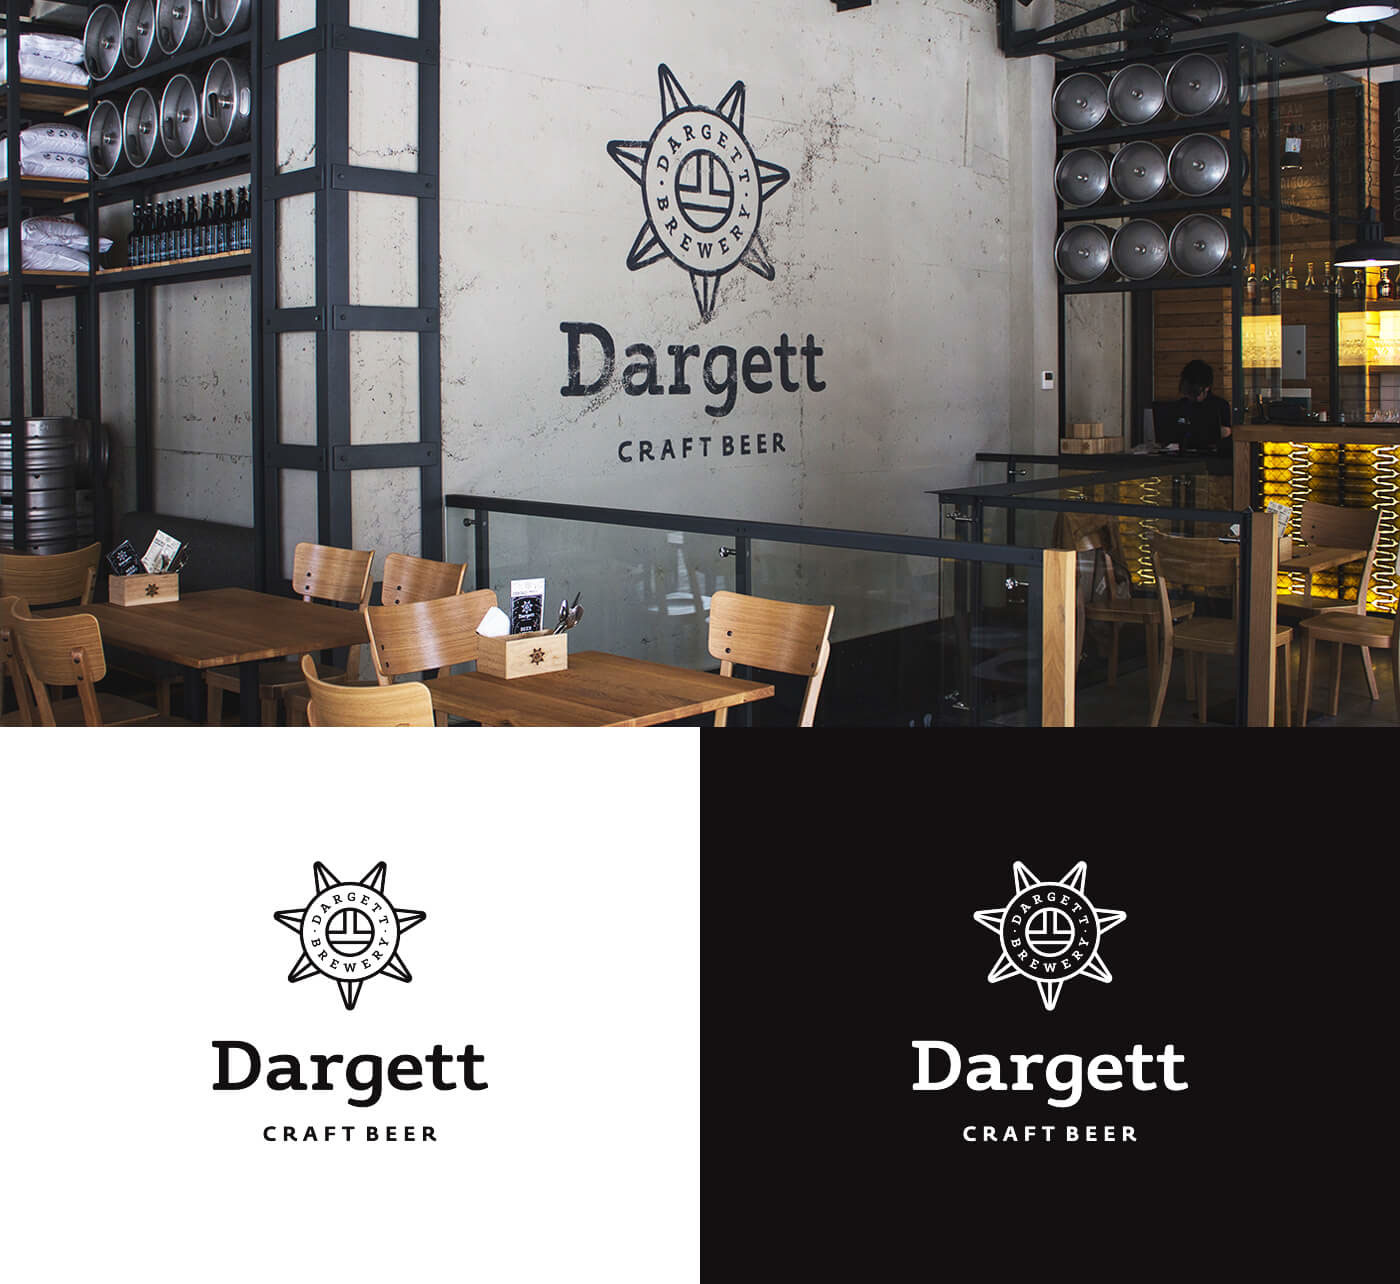 Dargett brewery craft beer Oatmeal stout IPA logo Label design bottlle alcohol growler ale